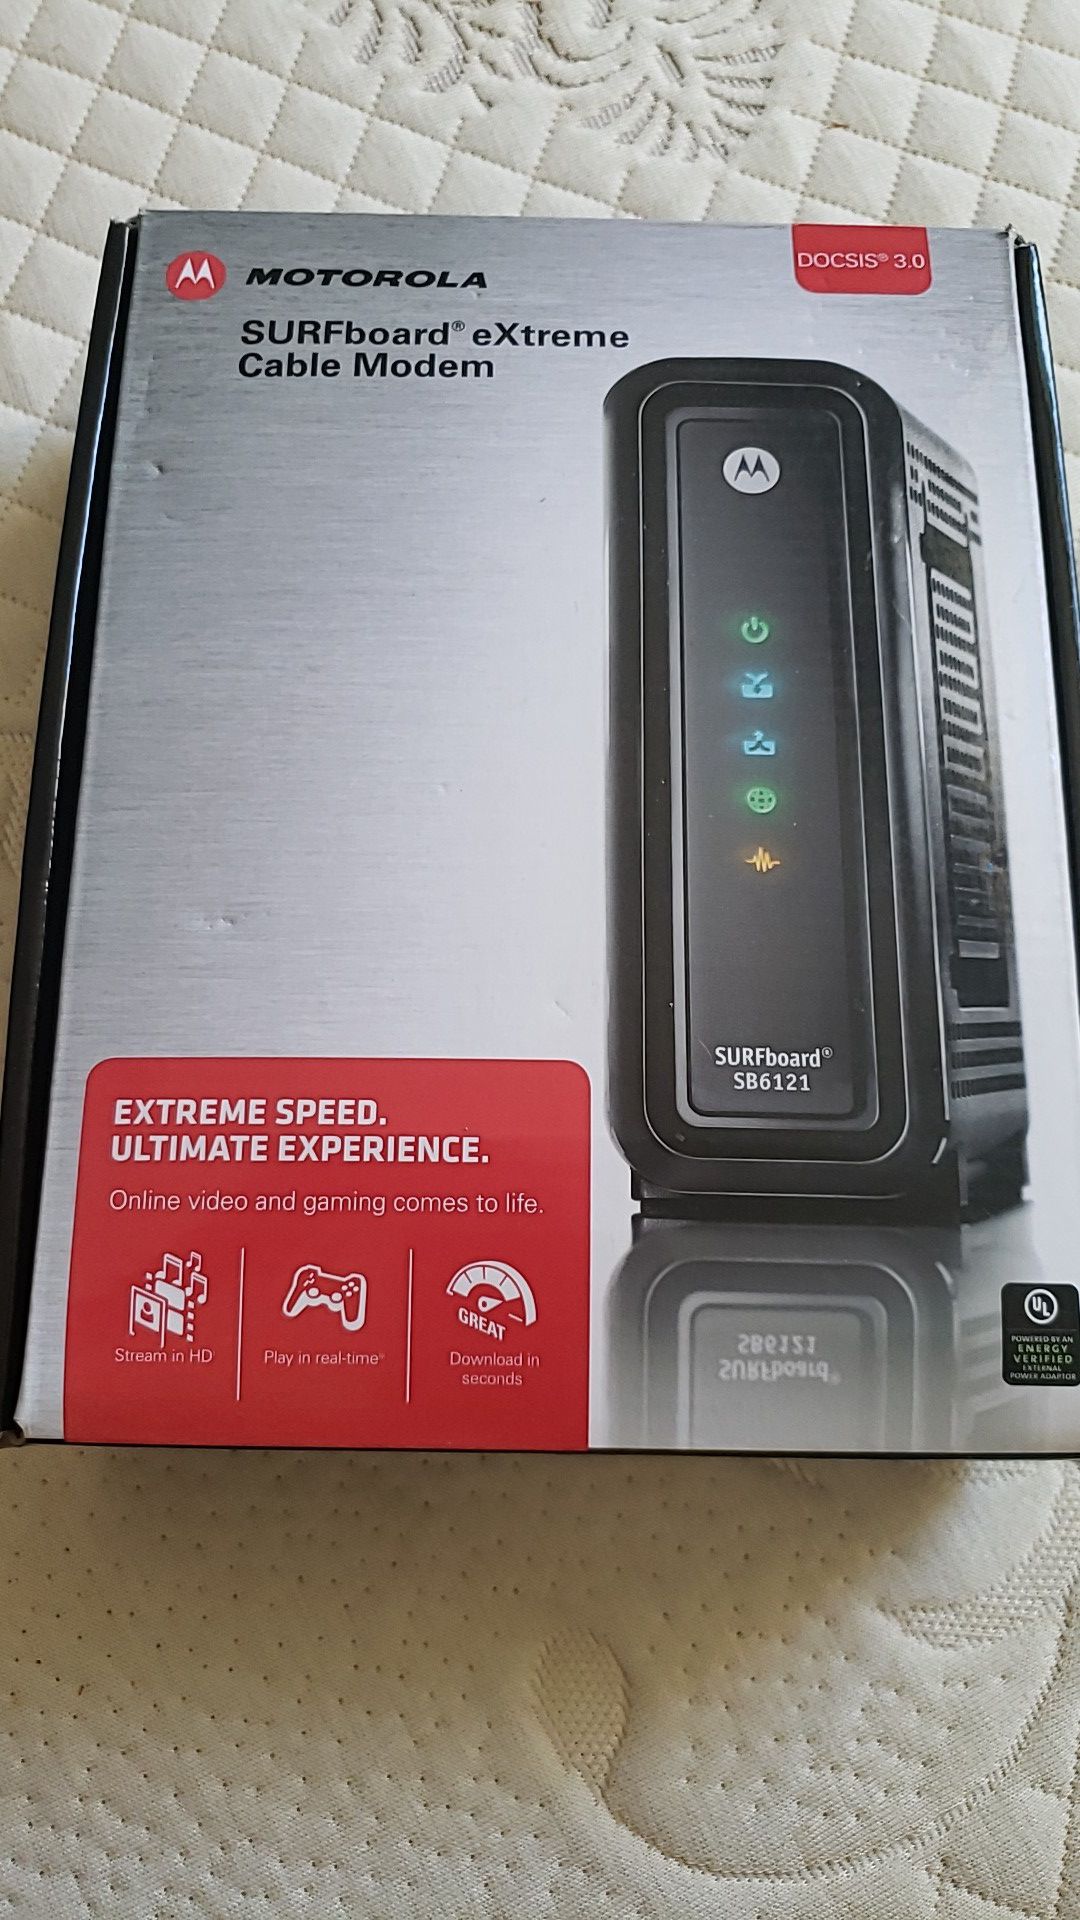 Motorola Surfboard SB6121 Modem with box and cables